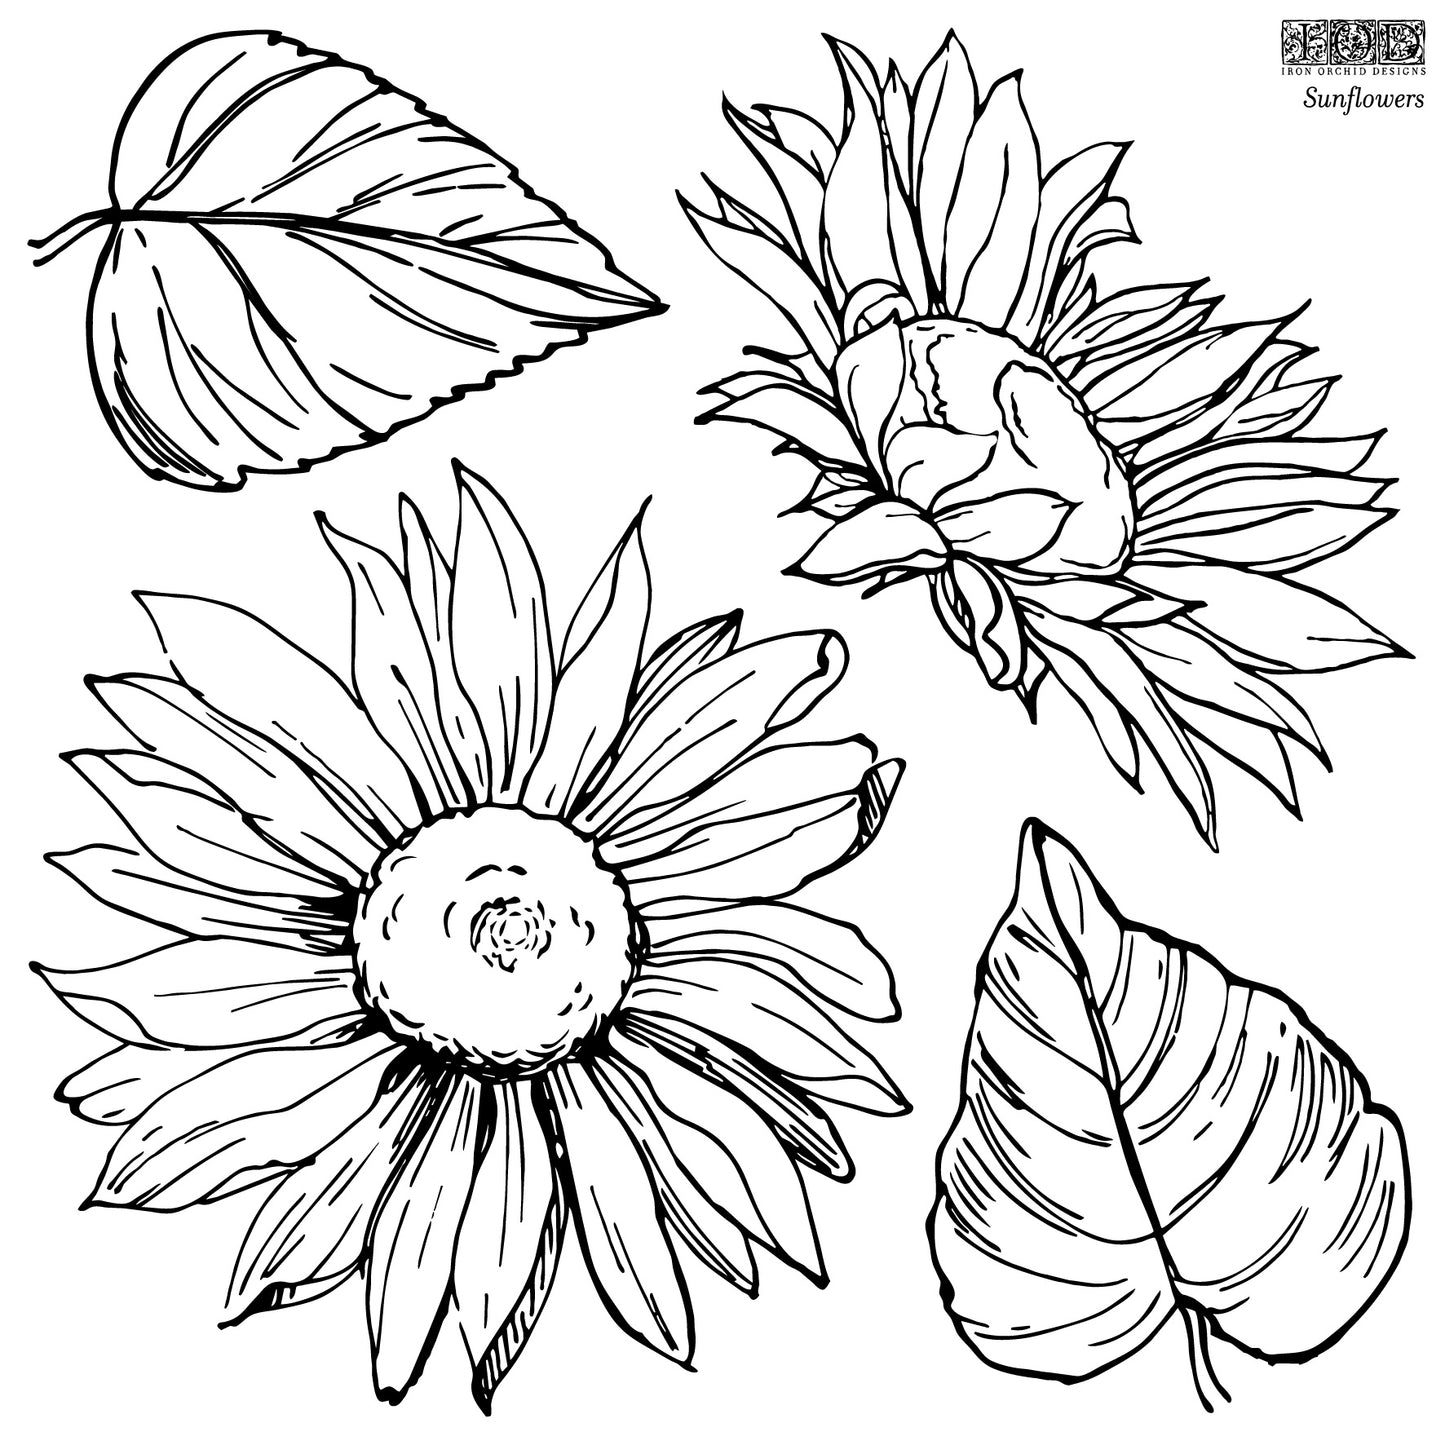 IOD Sunflowers Stamp by Iron Orchid Designs